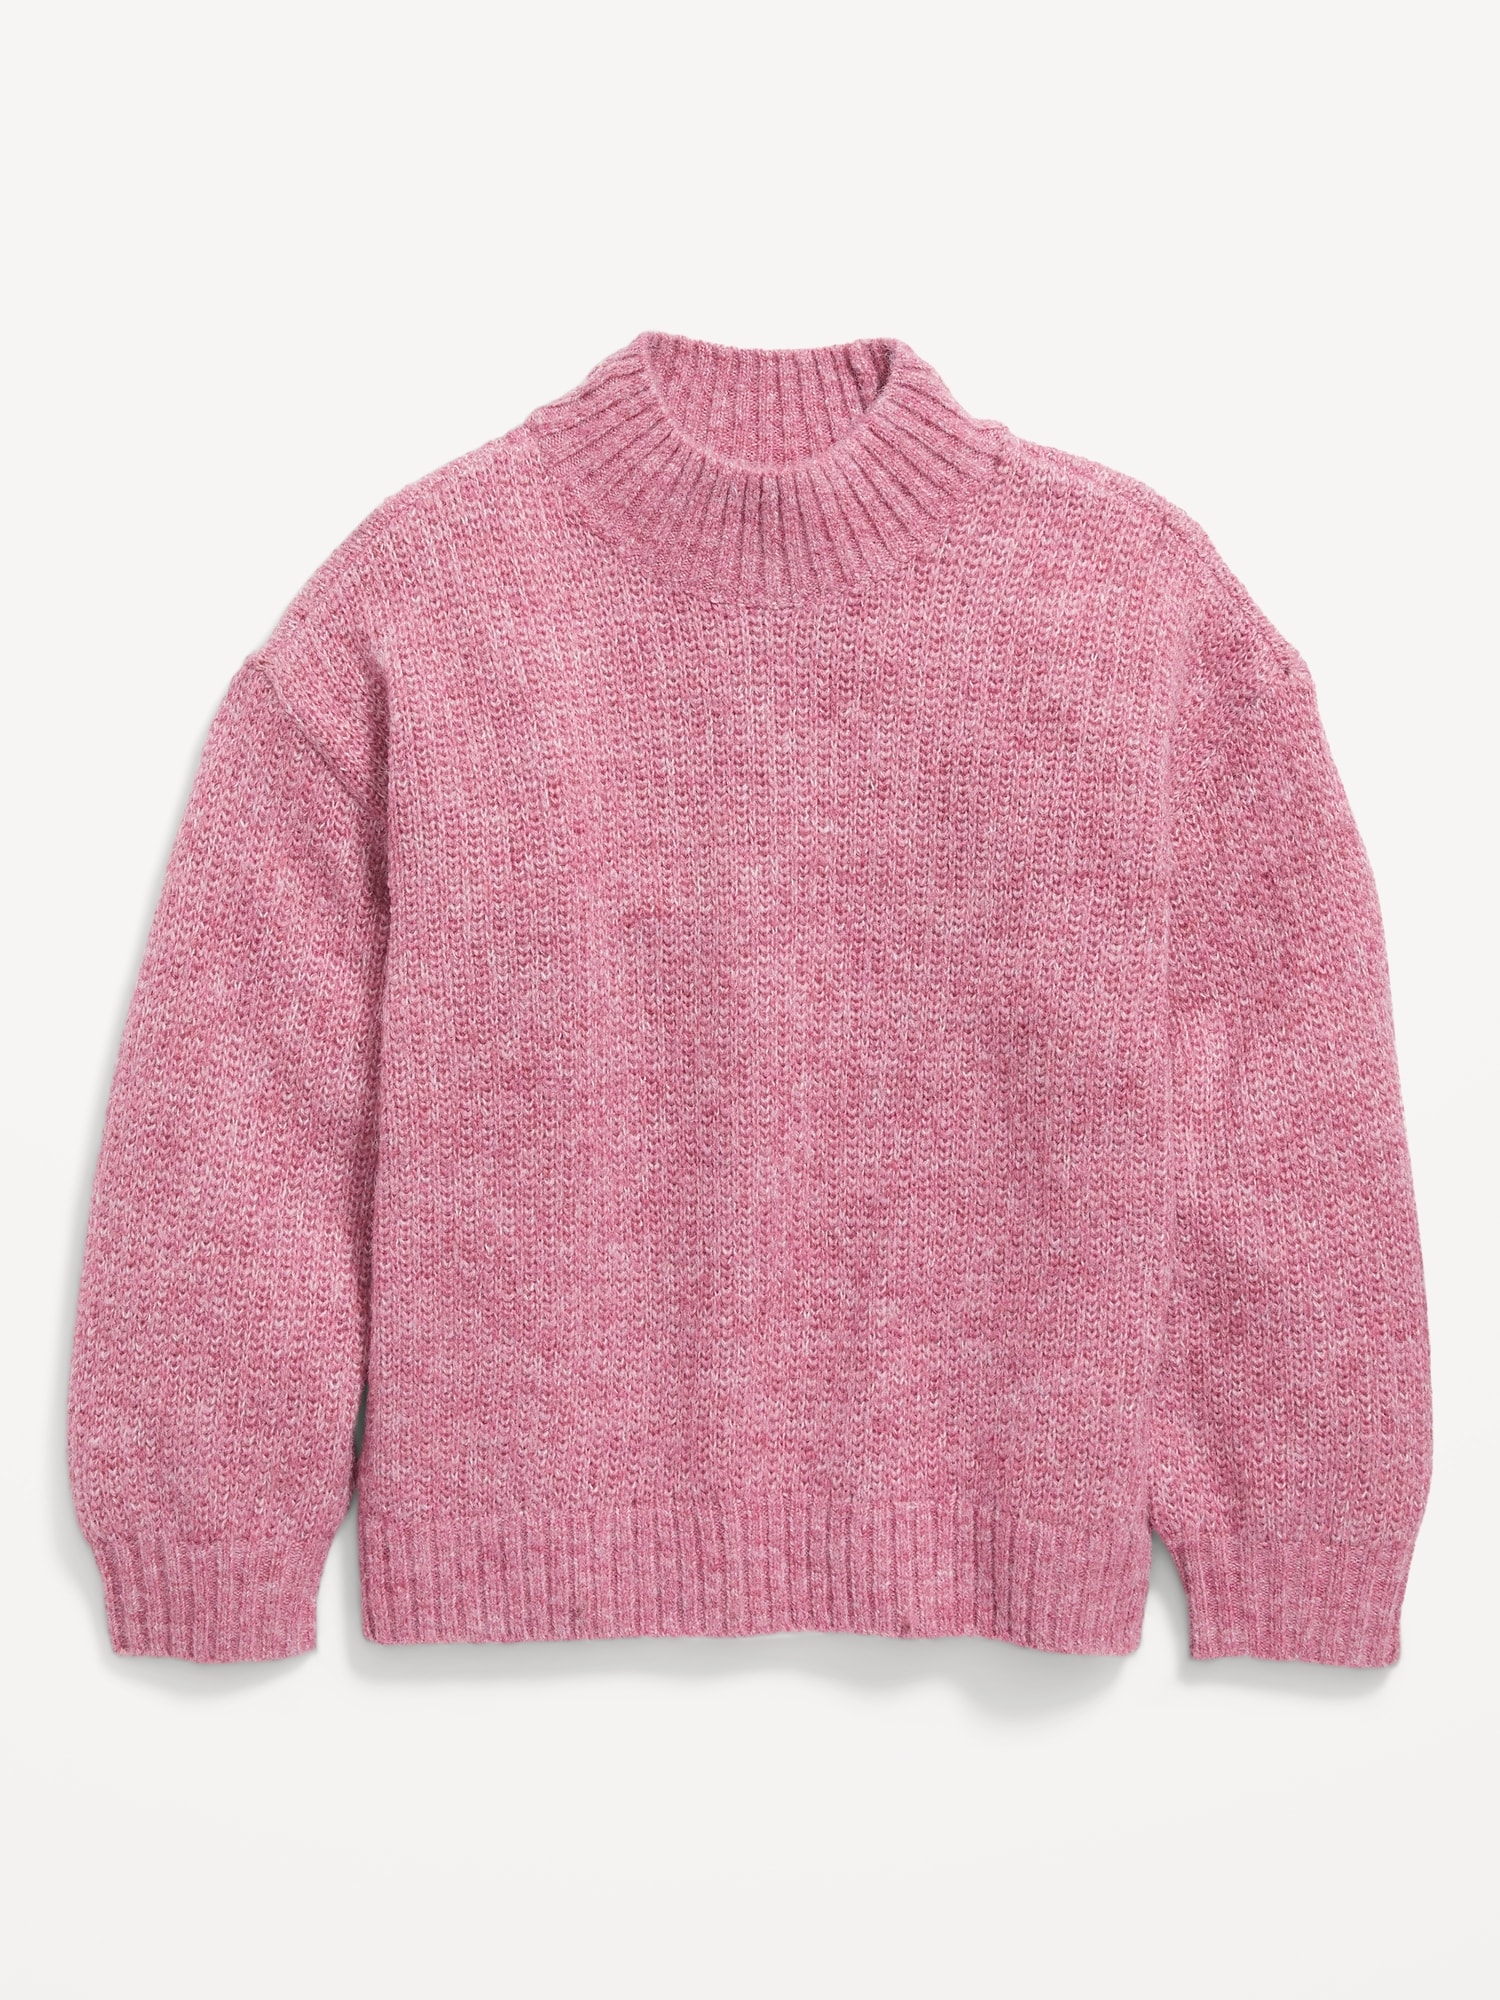 Old Navy Cozy Mock-Neck Shaker-Stitch Cocoon Sweater for Girls pink. 1